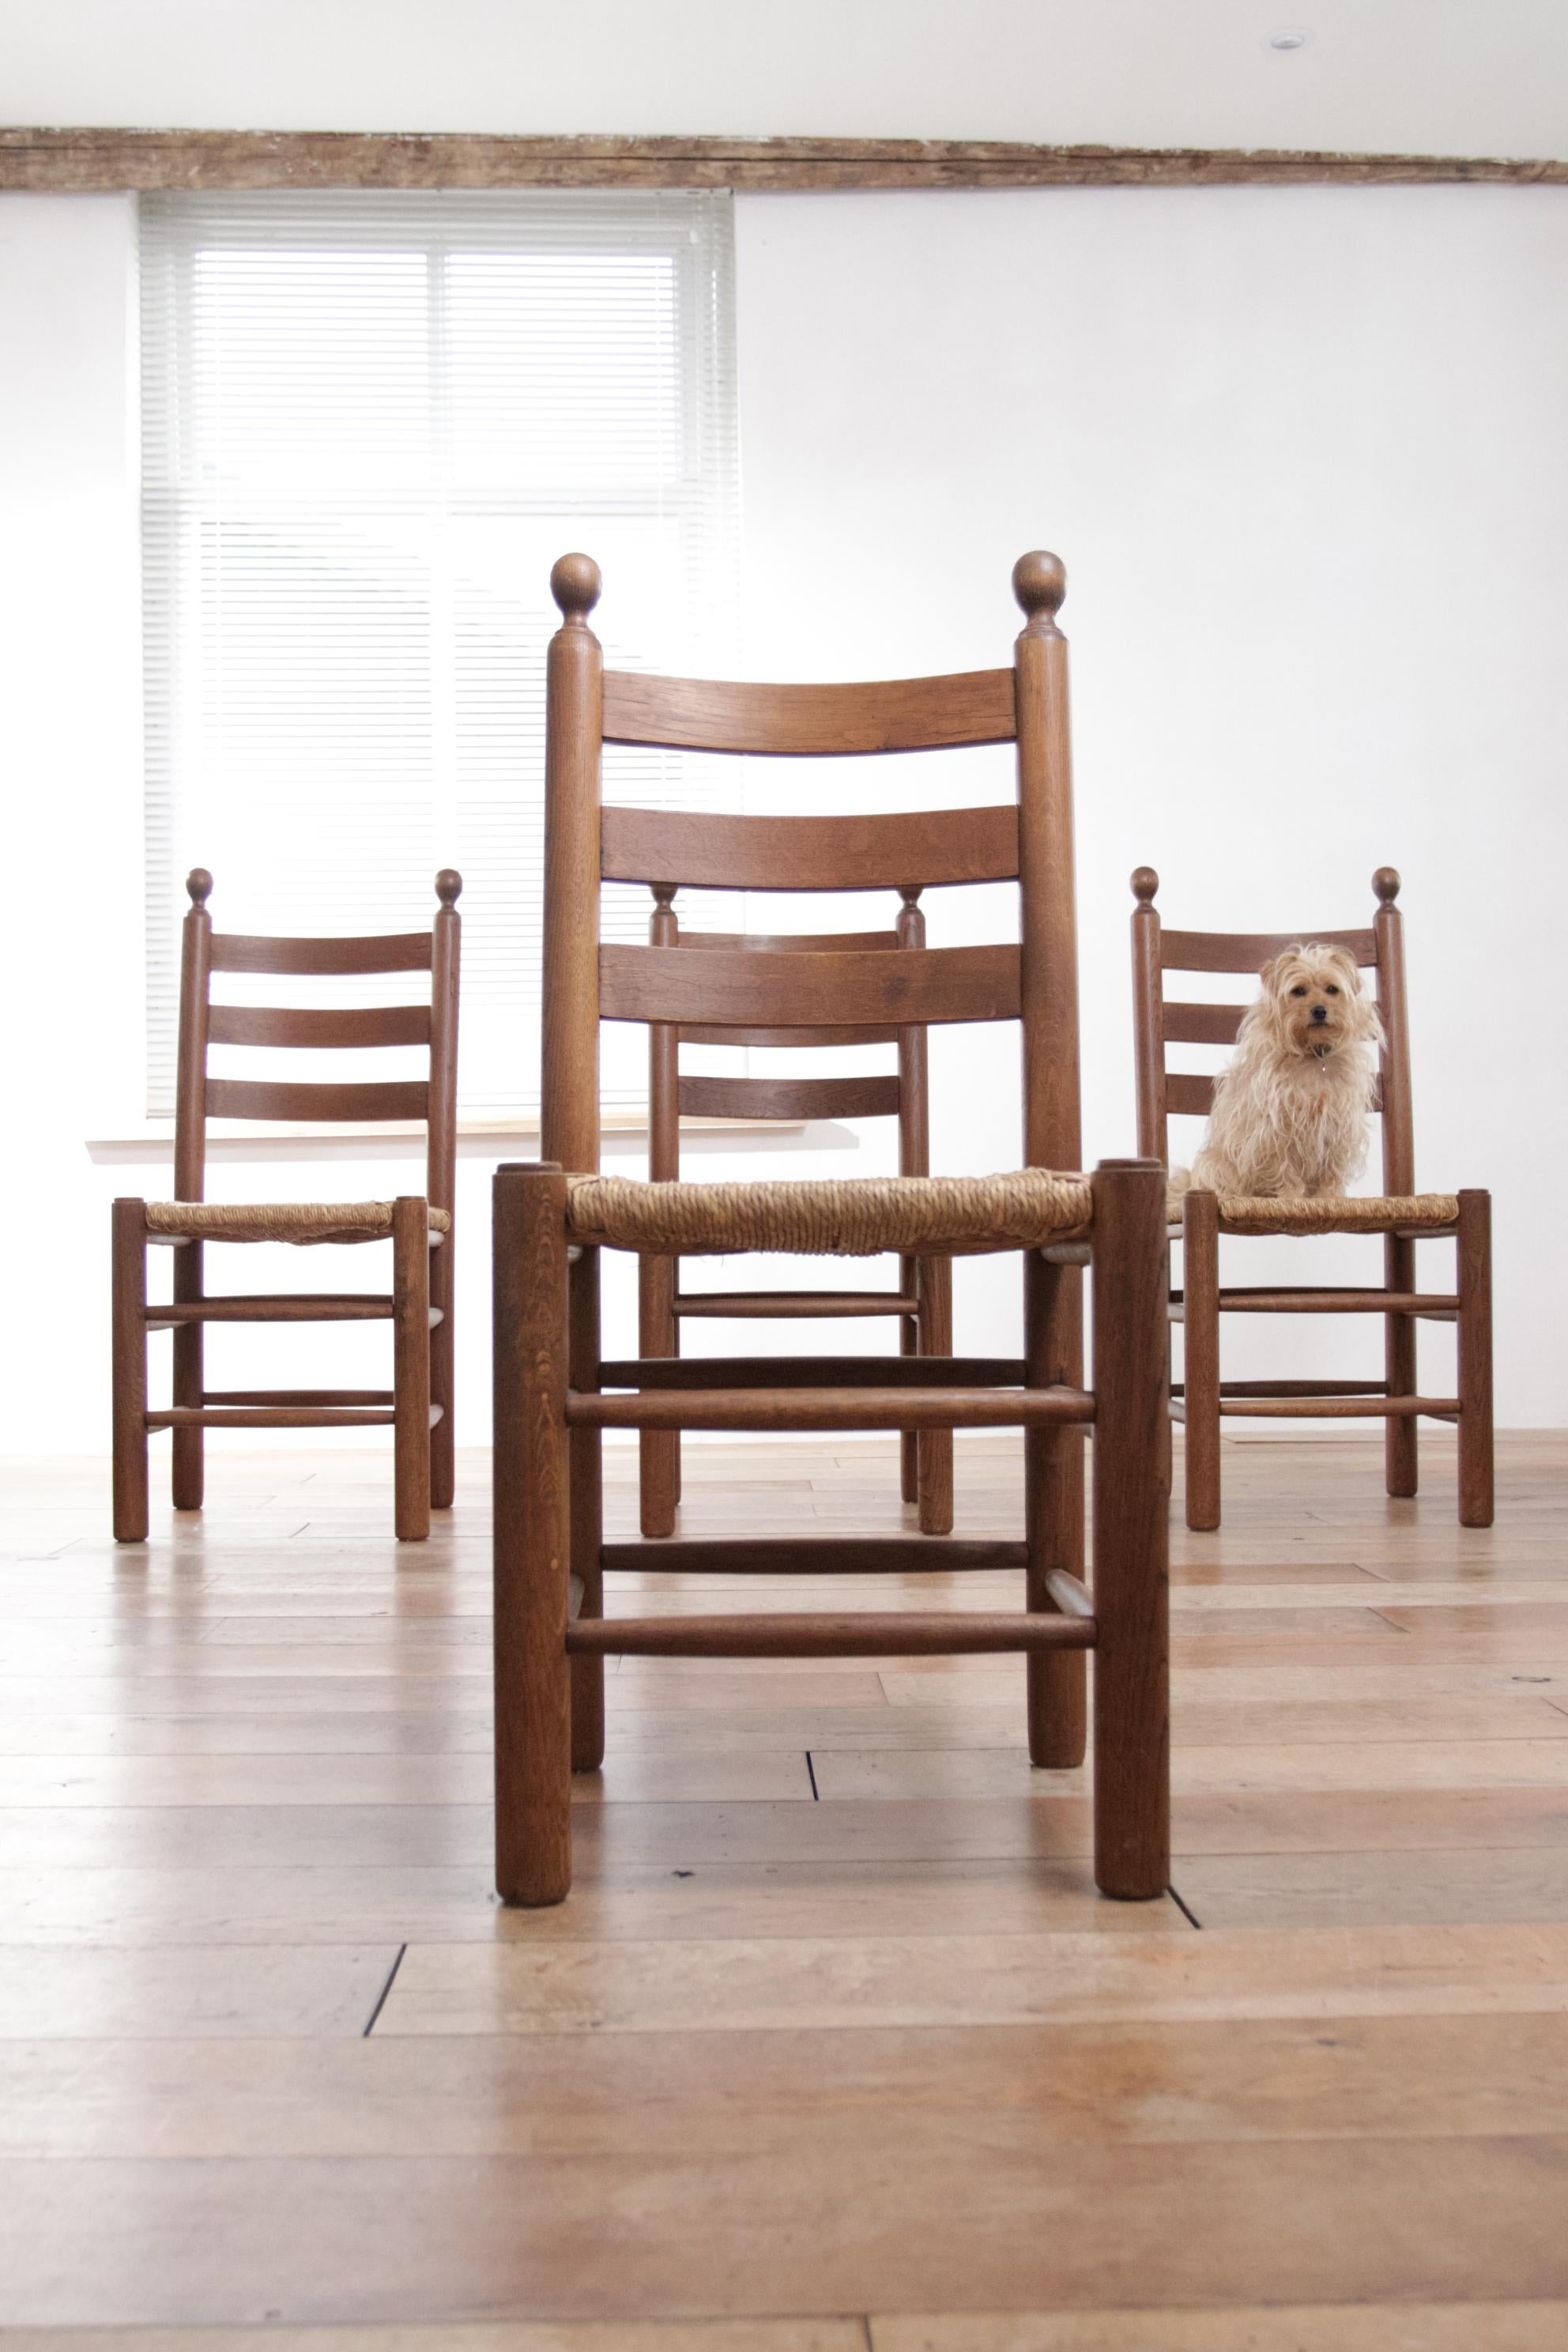 Beautiful chairs from the 50s made of solid oak with a wicker woven seat.
Fit perfectly with the style of designers such as Charlotte Perriand, Jean Royère and Charles Dudouyt.
They are comfortable and have a very nice warm appearance due to the